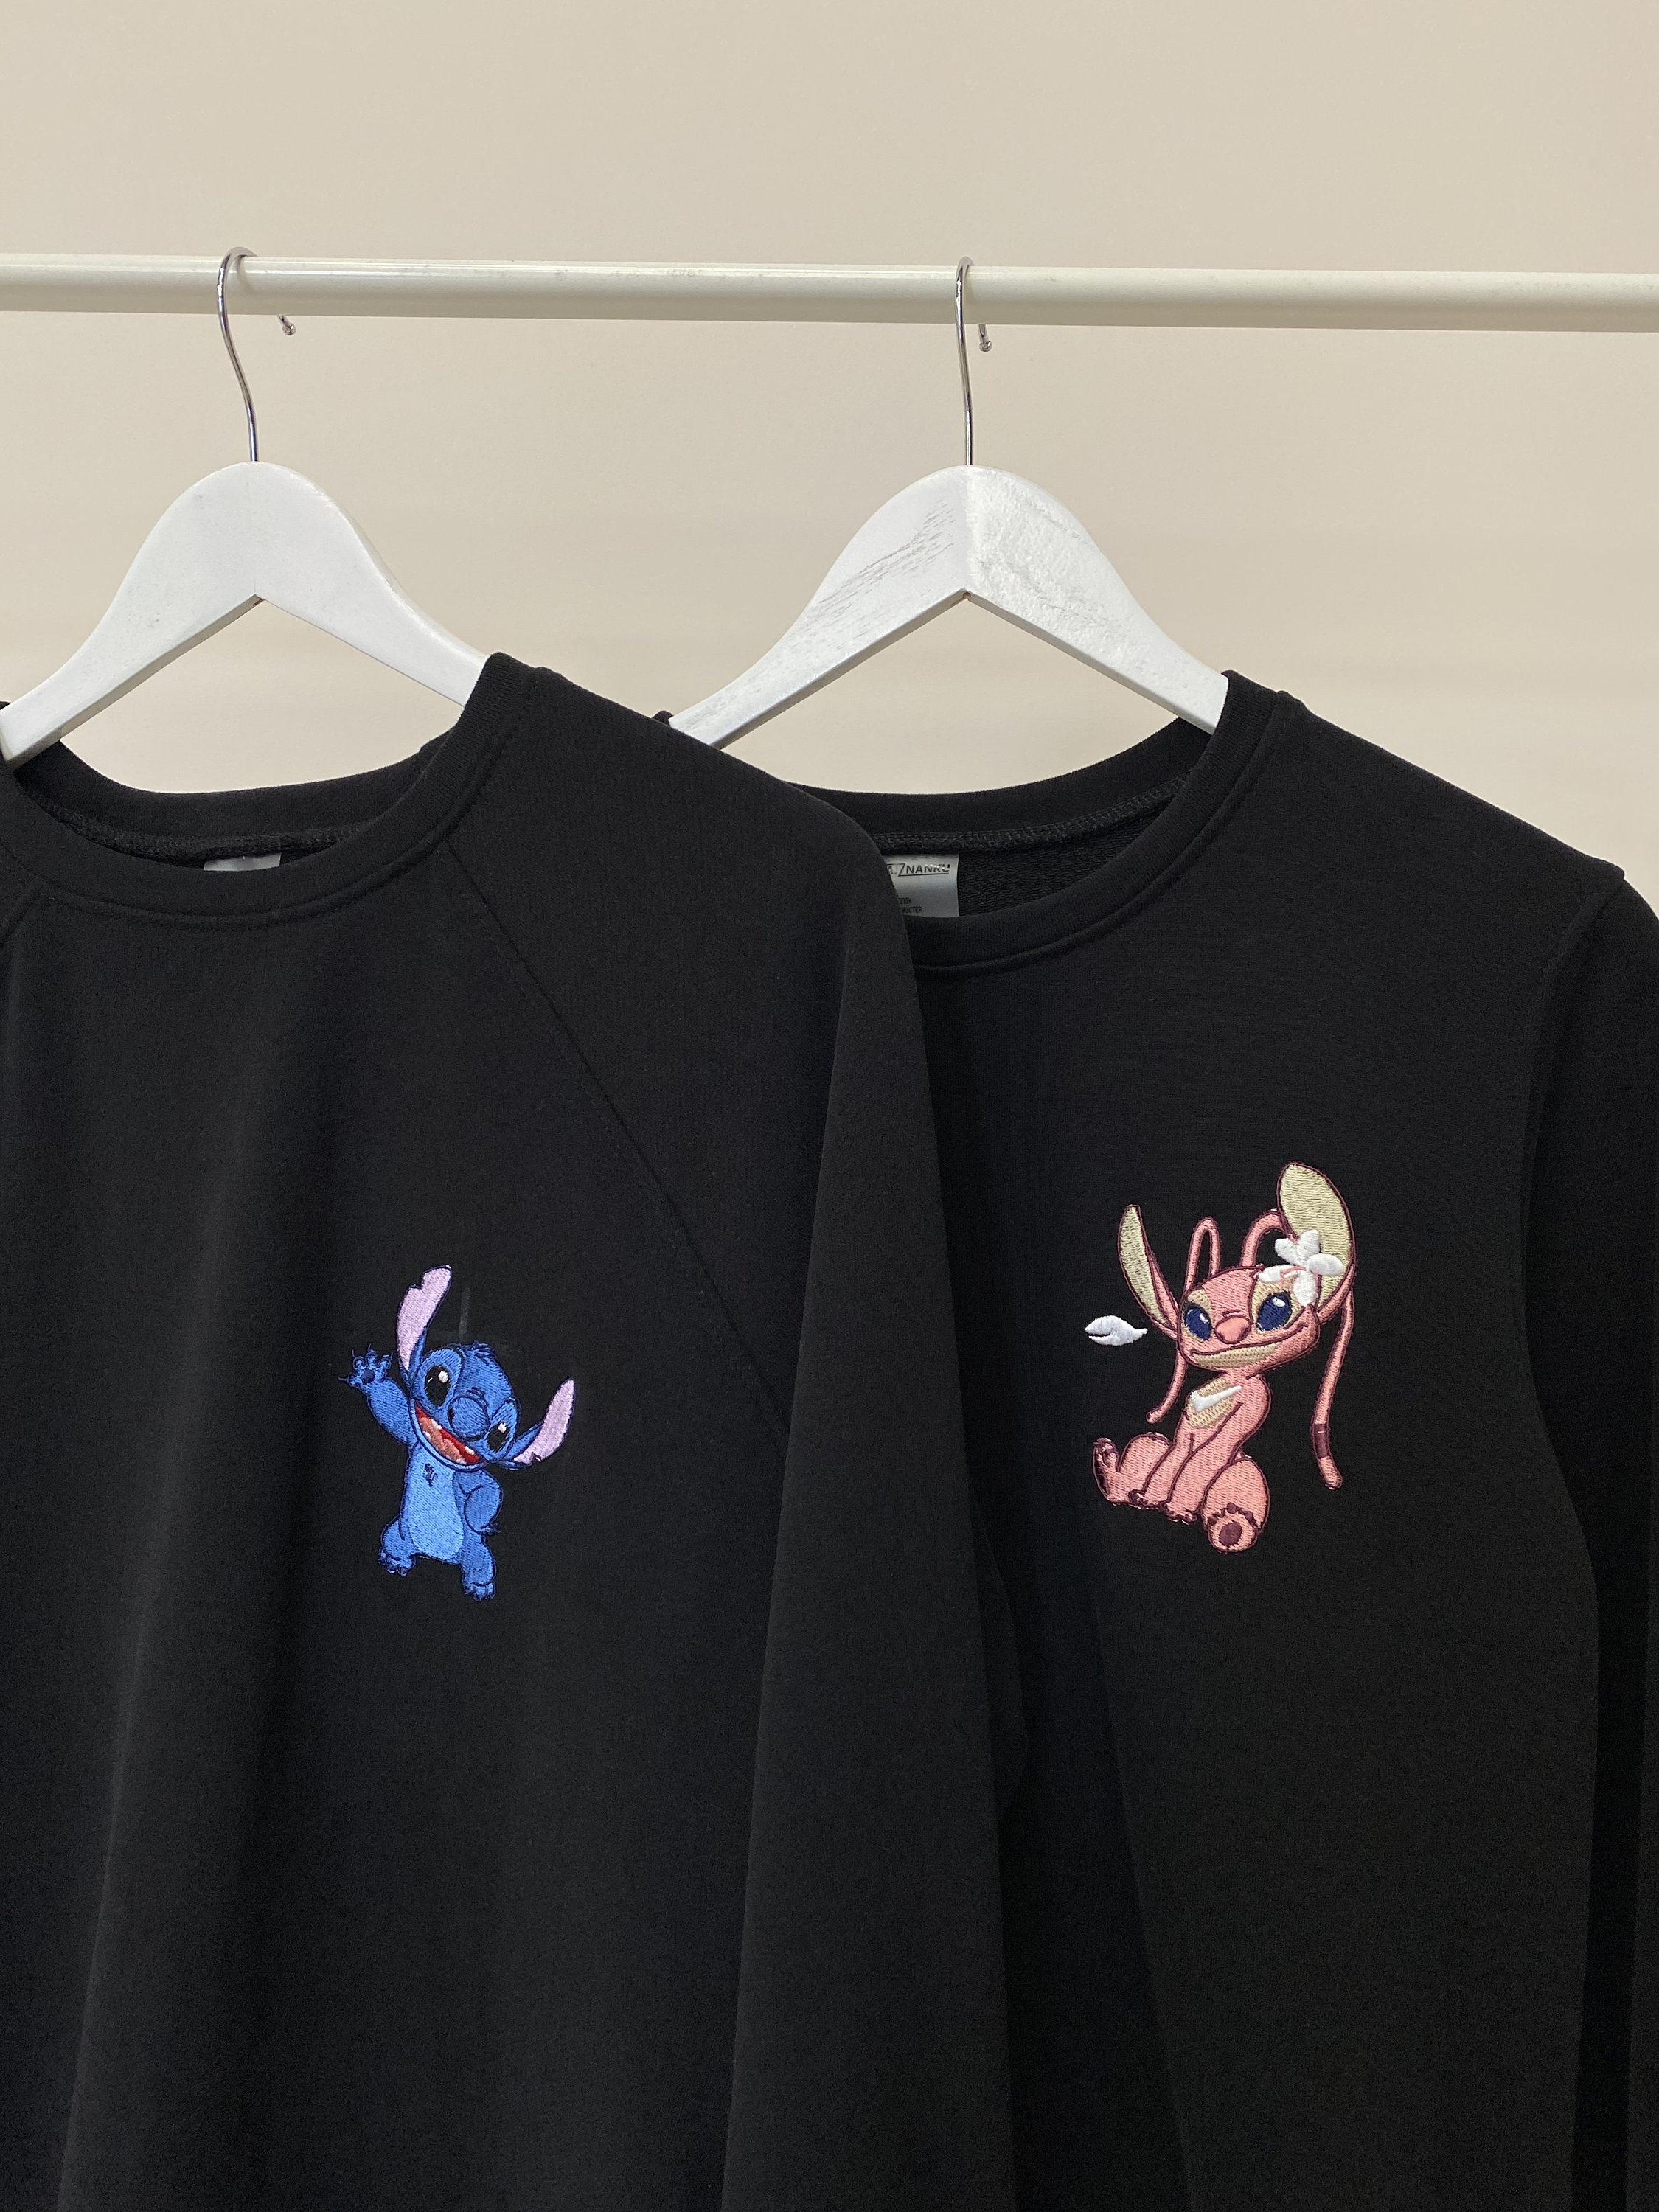 Couple Cartoon Alien Stitch Embroidered Hoodies Matching | Etsy